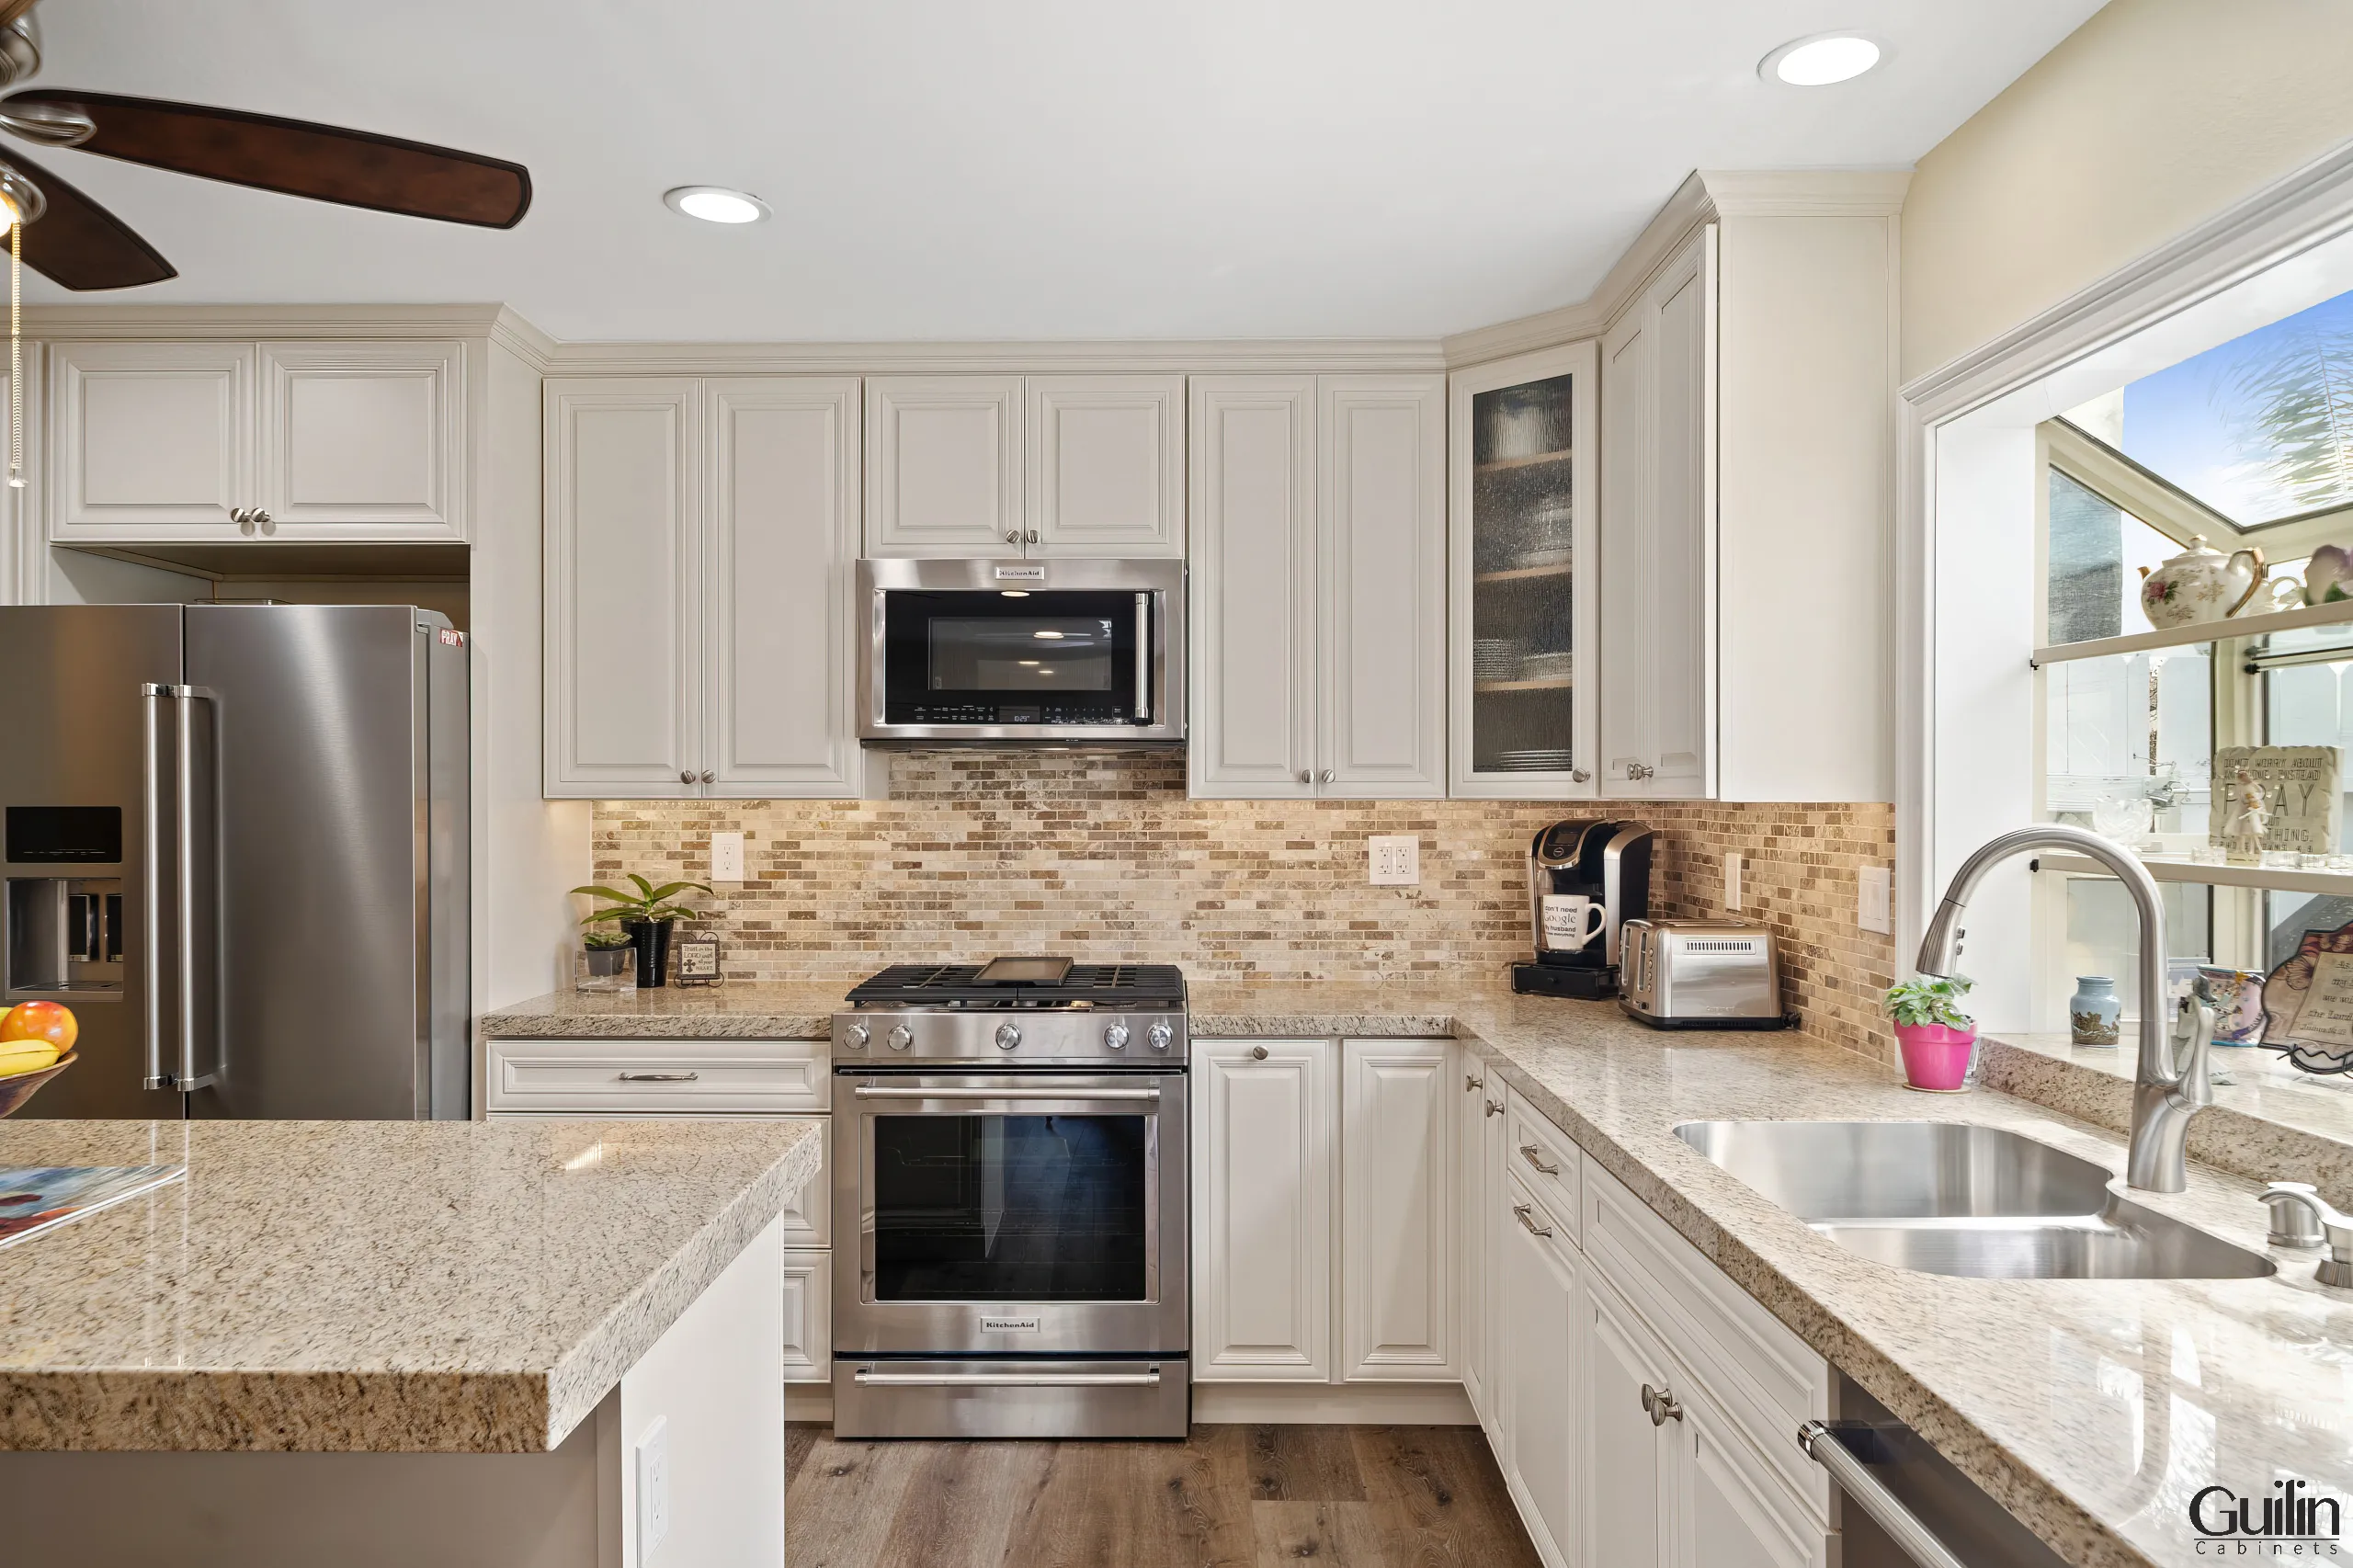 Wall cabinets are mounted on the wall above the countertops, offering additional storage space for items that are not frequently used. 